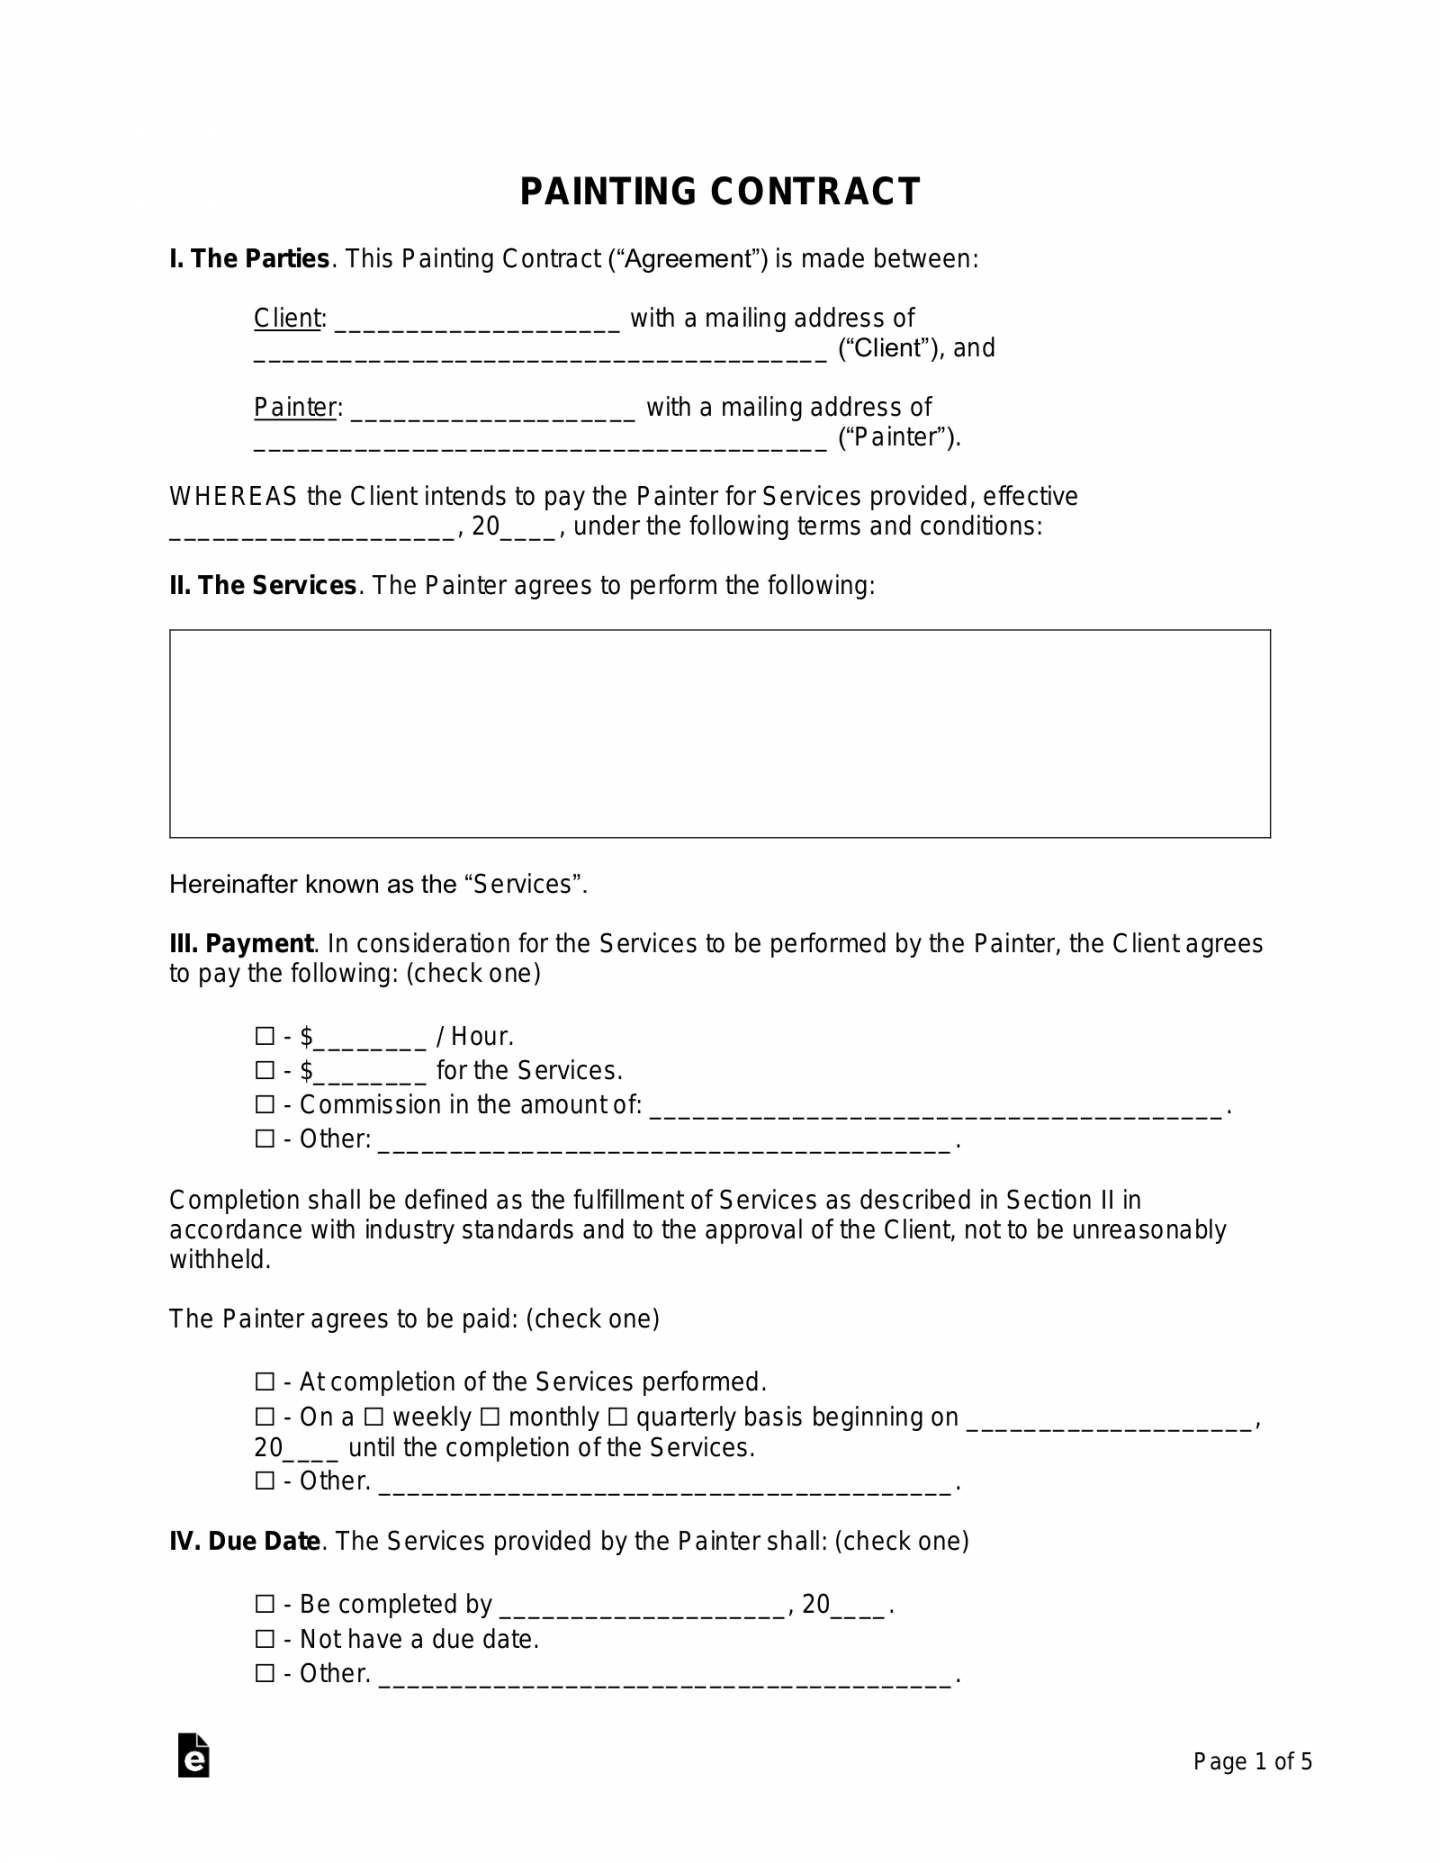 Free Painting Contract Template - PDF  Word – eForms